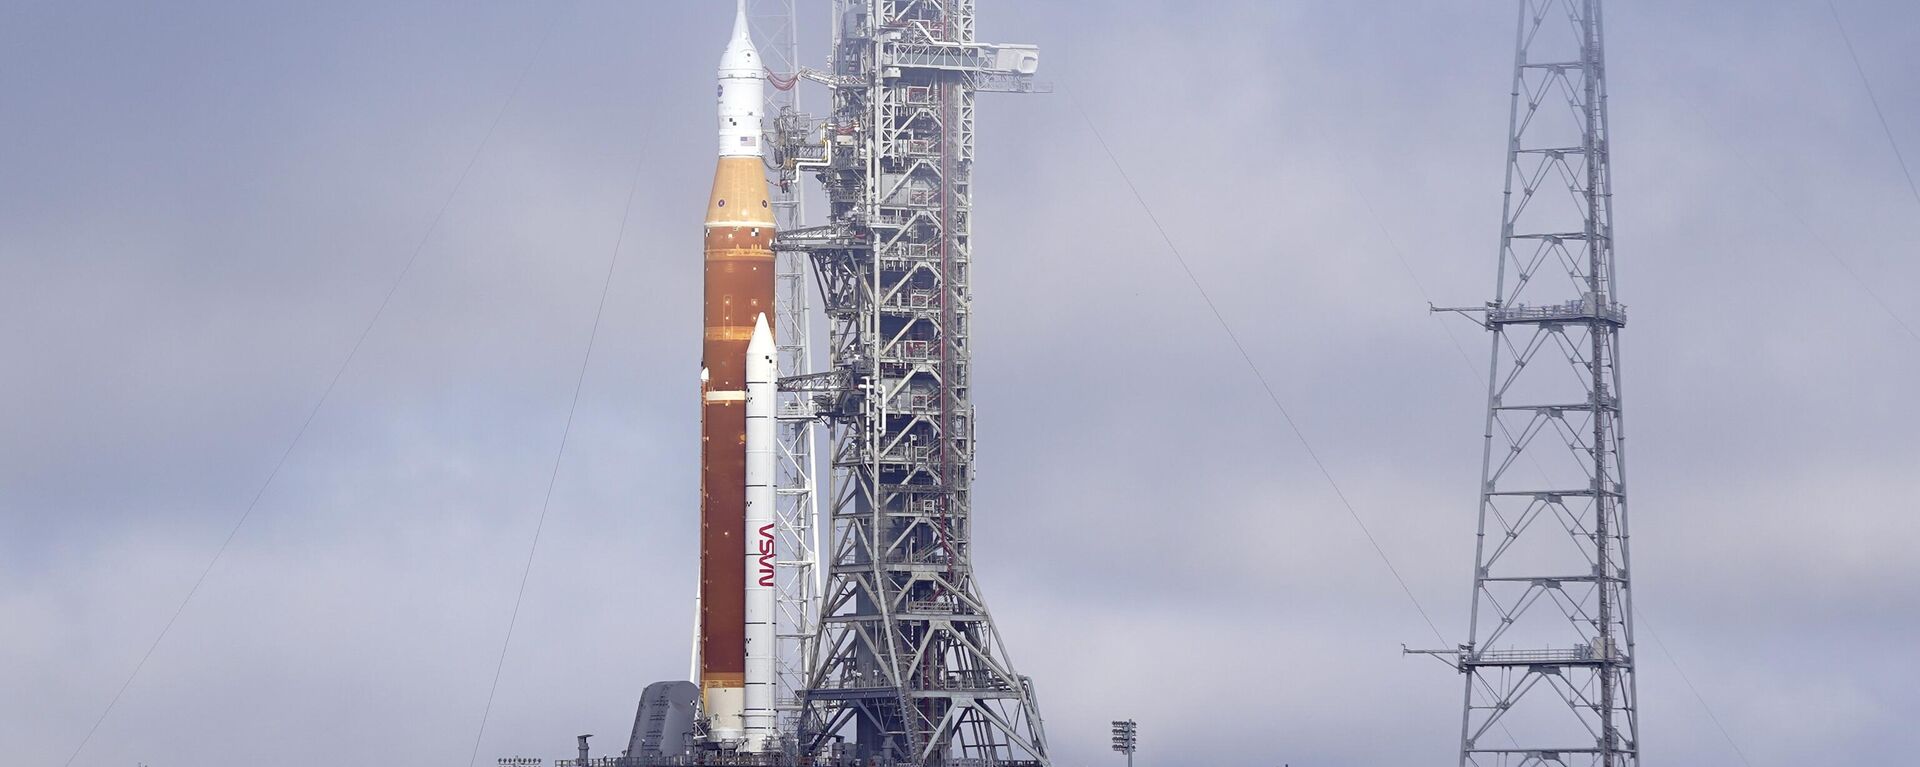 The NASA Artemis rocket with the Orion spacecraft aboard stands on pad 39B at the Kennedy Space Center in Cape Canaveral, Fla., Friday, March 18, 2022. NASA is kicking off a critical countdown test for its new moon rocket. The two-day dress rehearsal began Friday, April 1, 2022 at Florida's Kennedy Space Center and will culminate Sunday with the loading of the rocket's fuel tanks. - Sputnik International, 1920, 27.08.2022